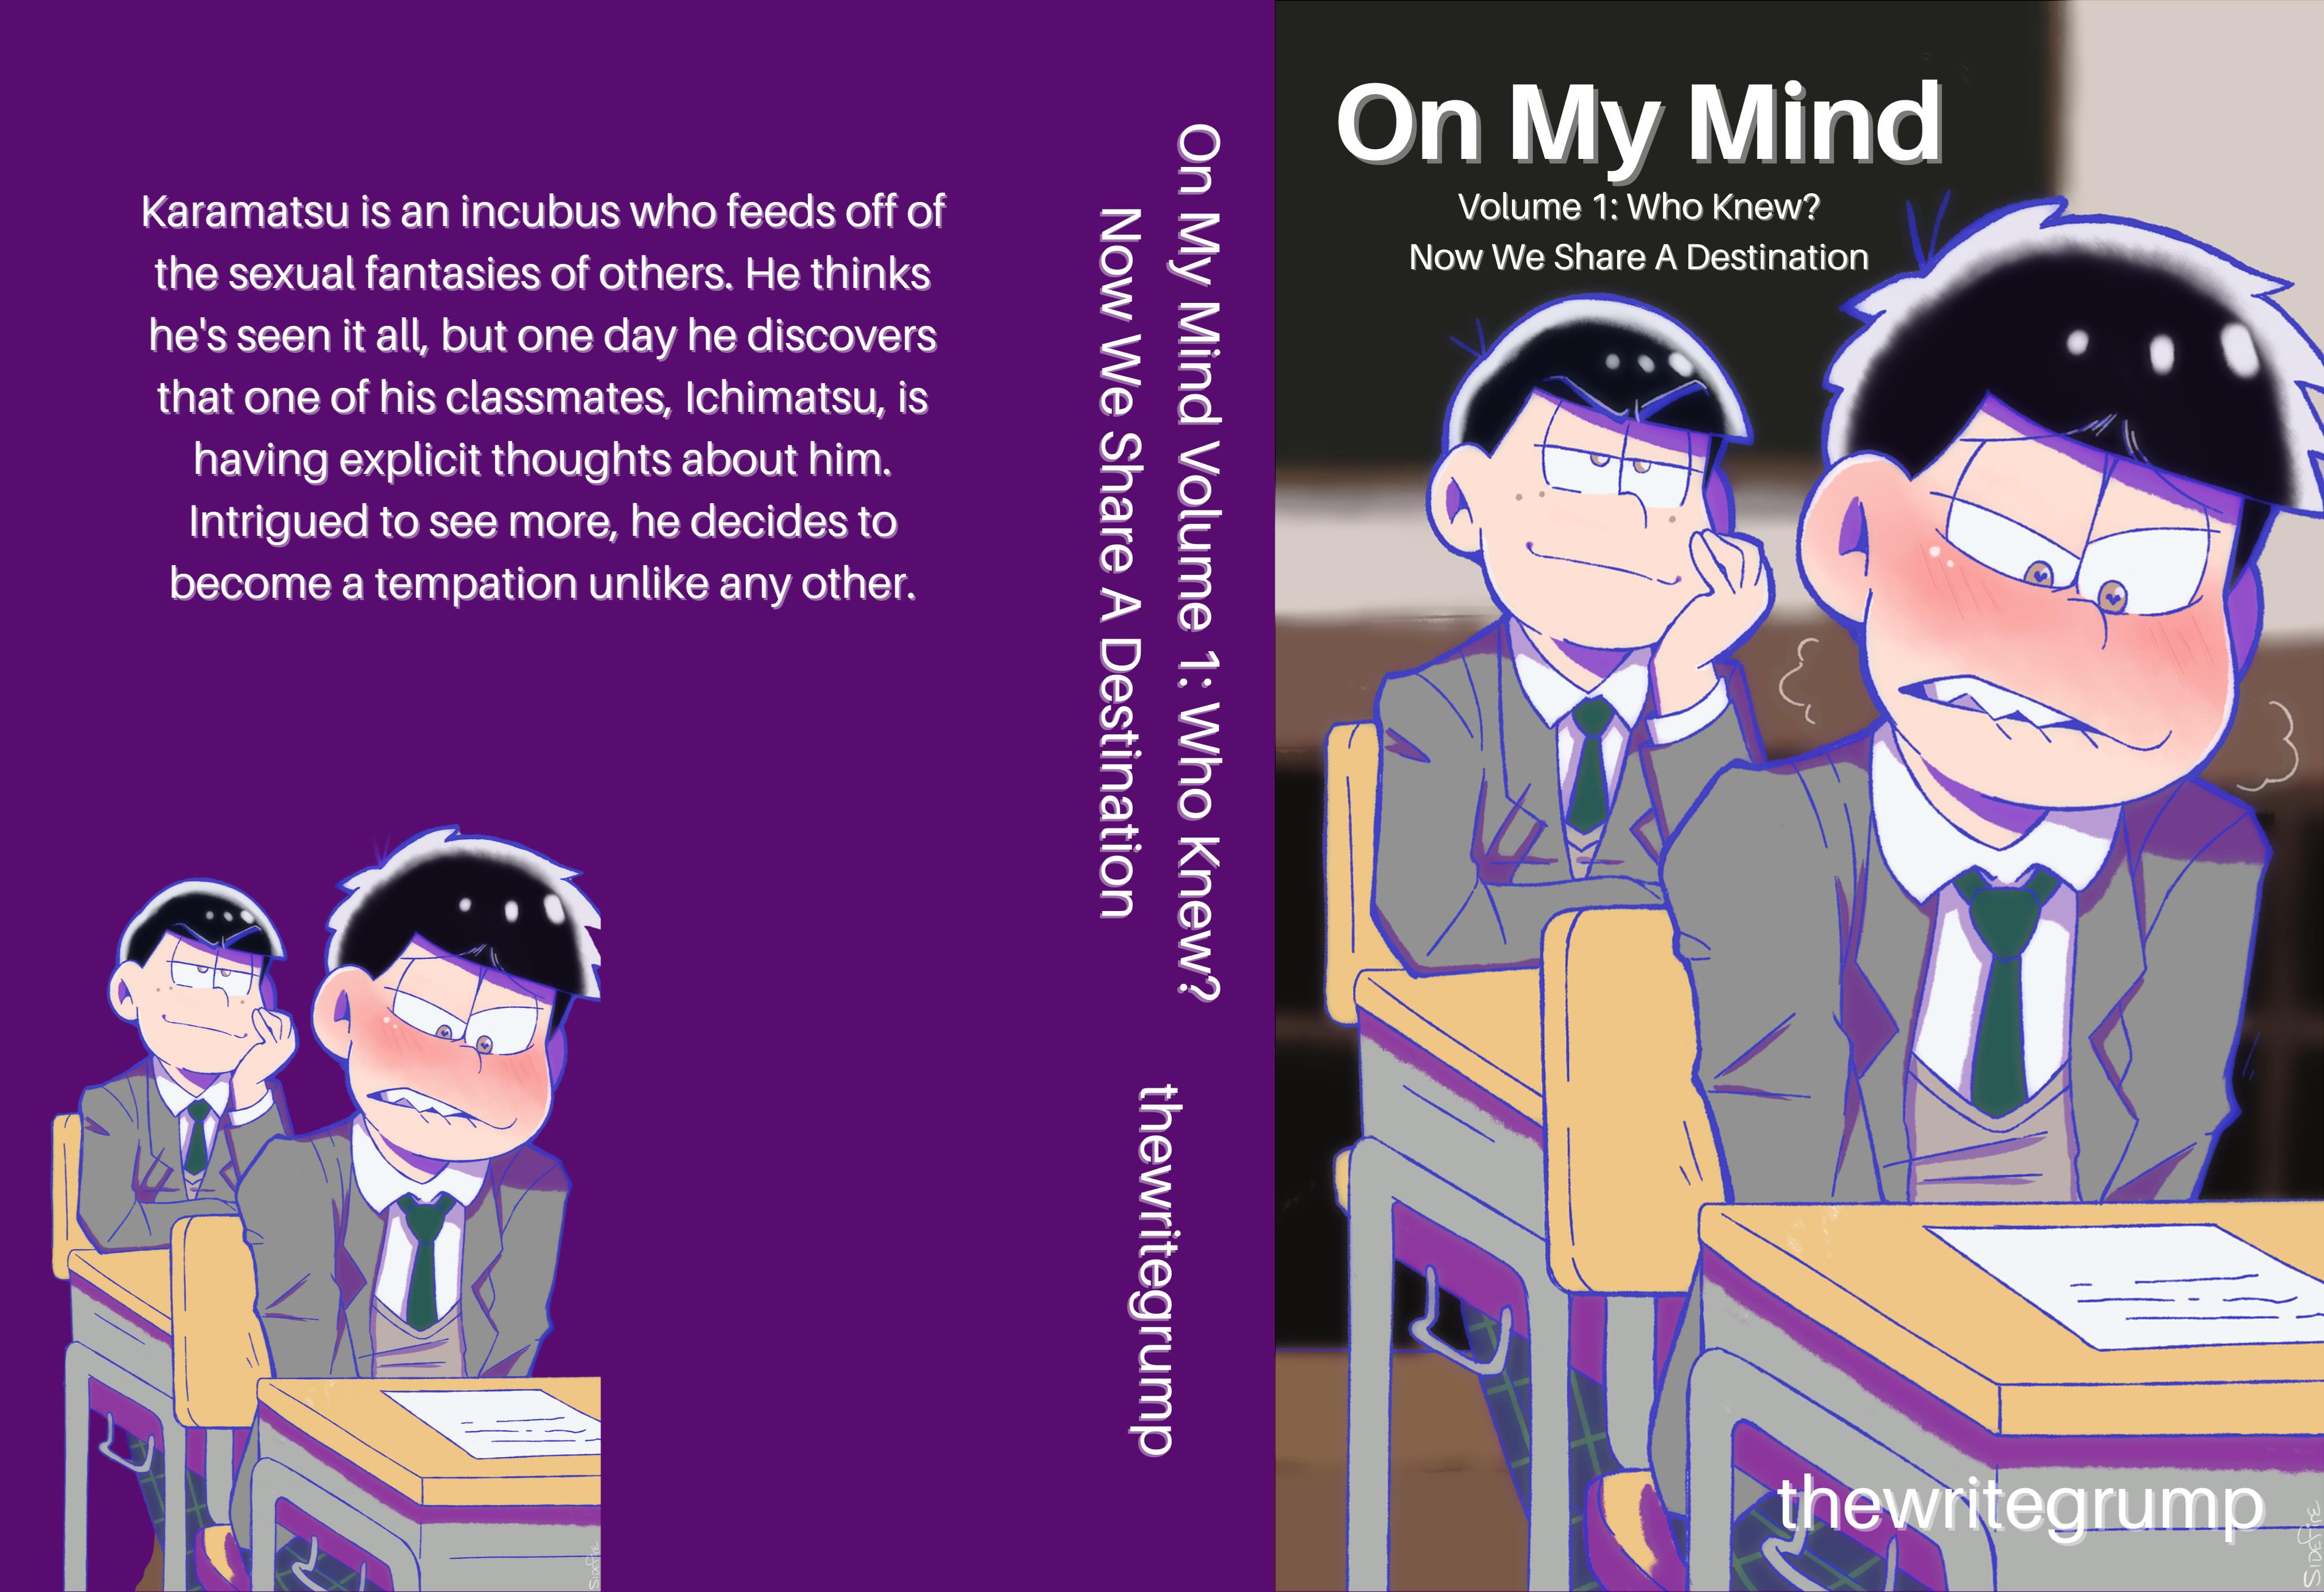 On My Mind Volume 1 cover image